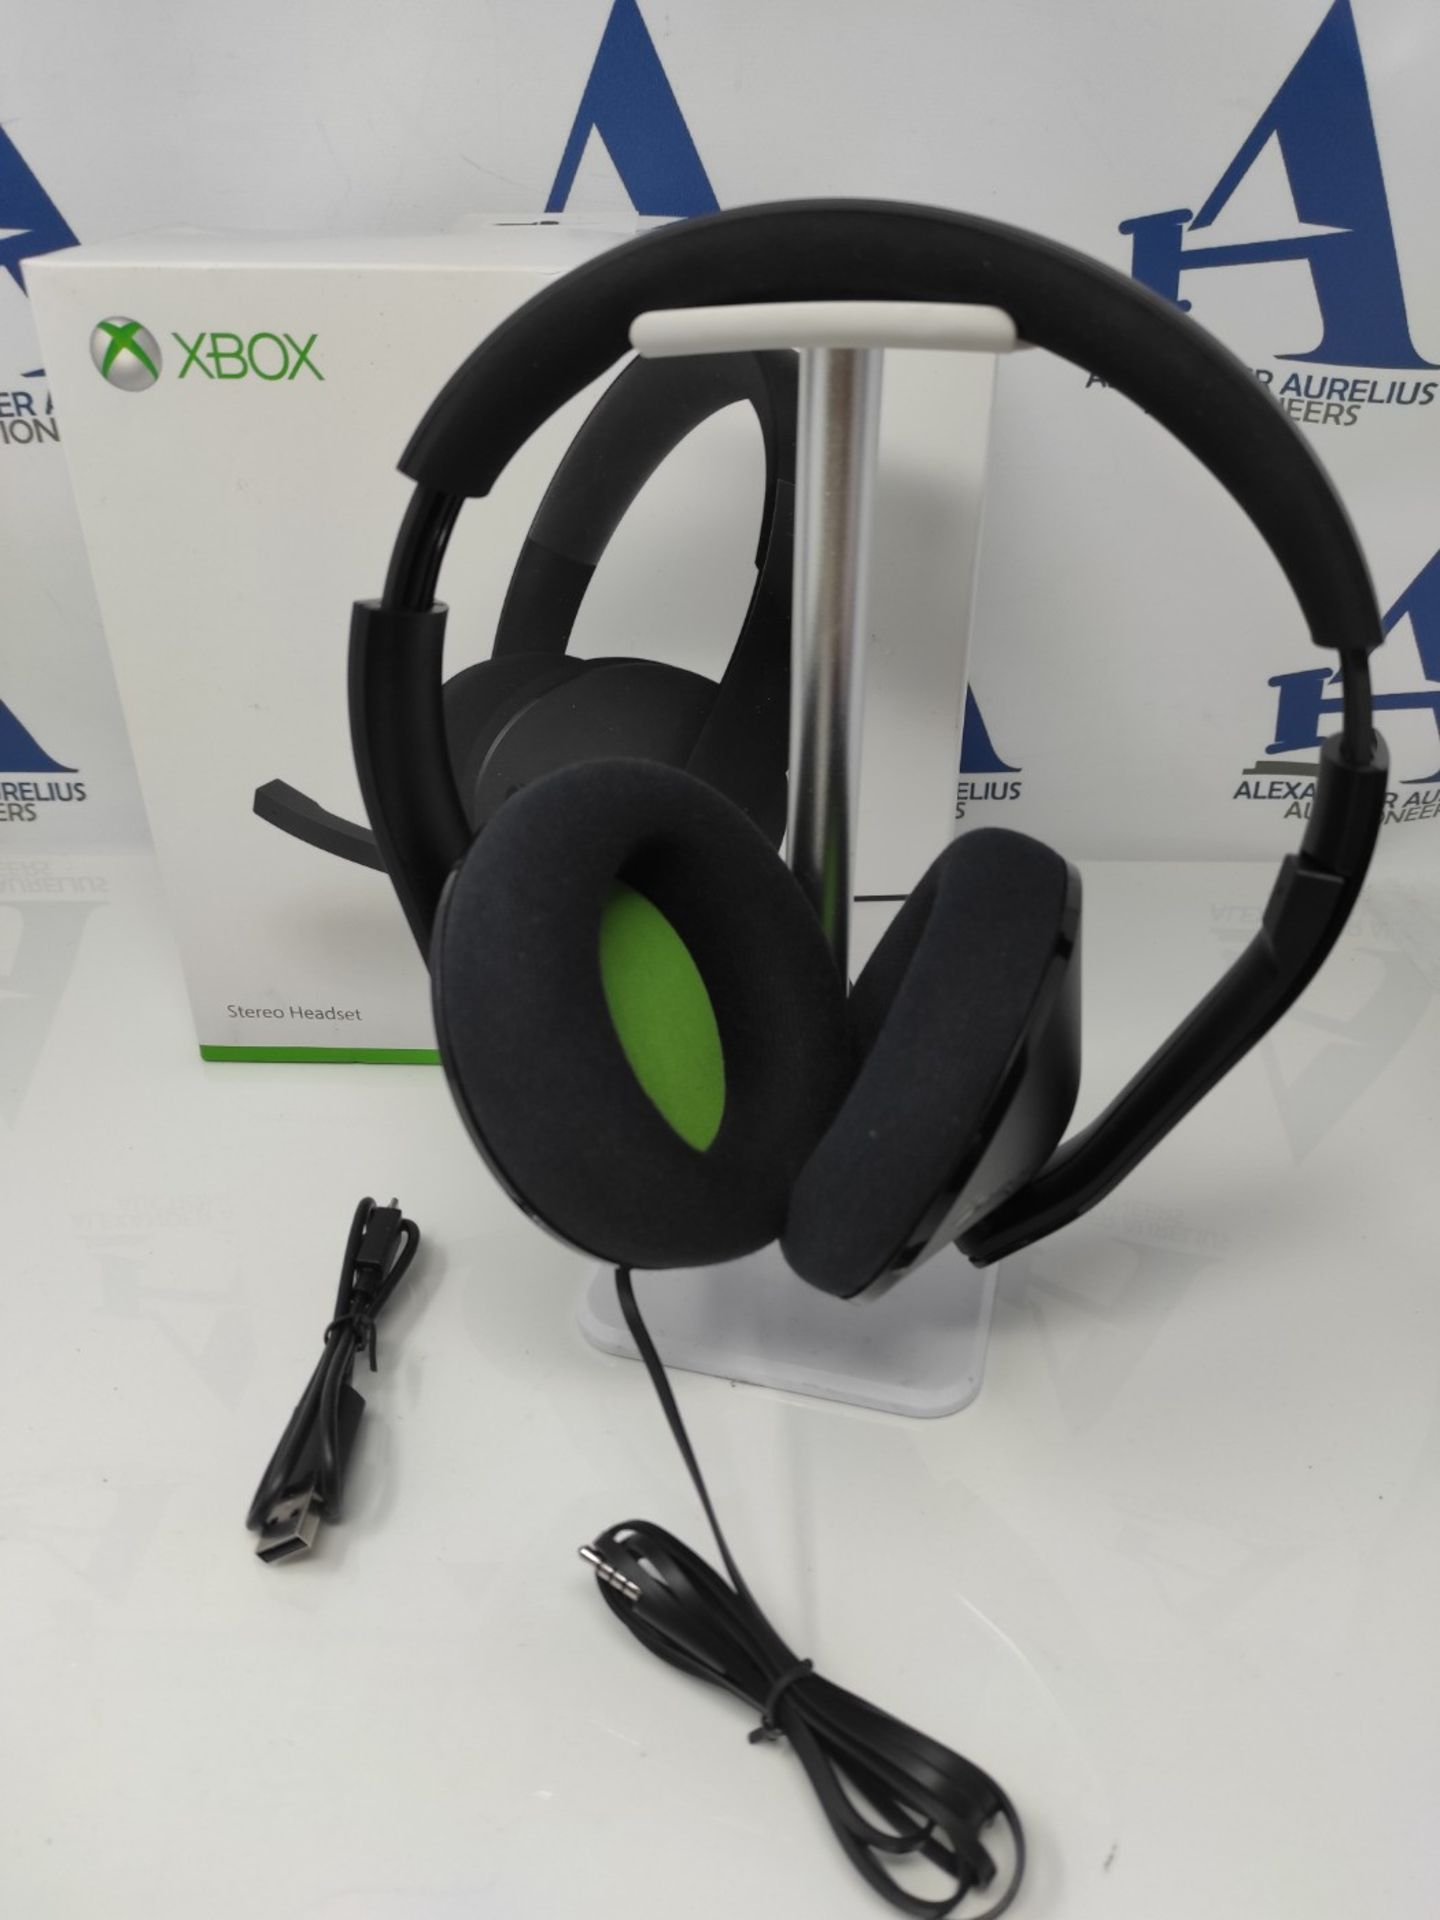 Xbox Stereo Headset - Image 2 of 2